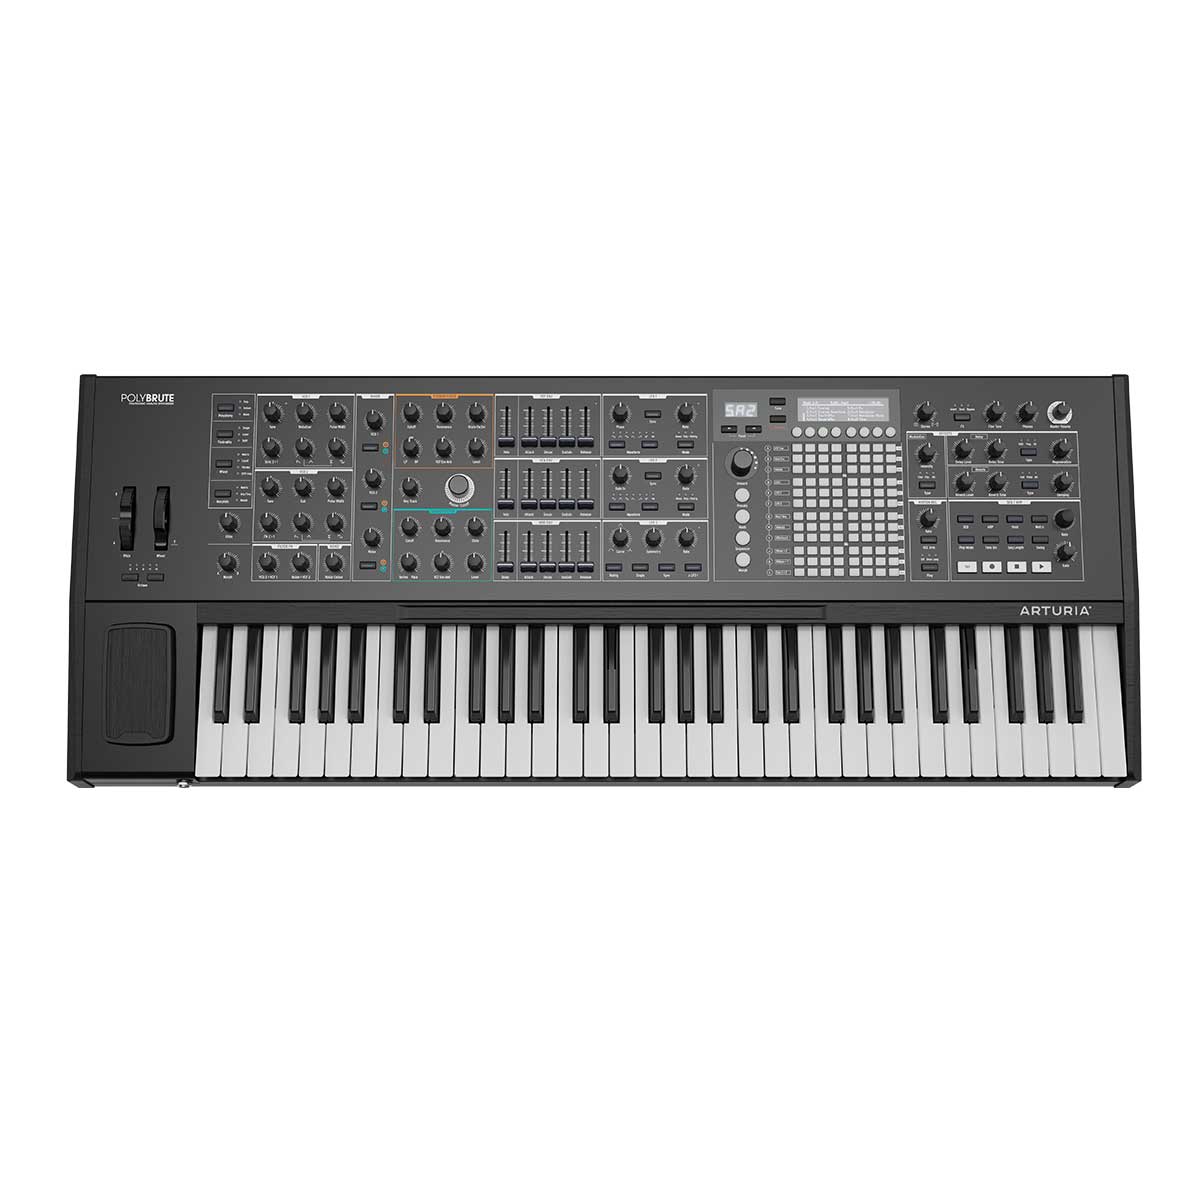 Arturia Polybrute Noir Limited Edition 6-voice 61-note analog synthesizer